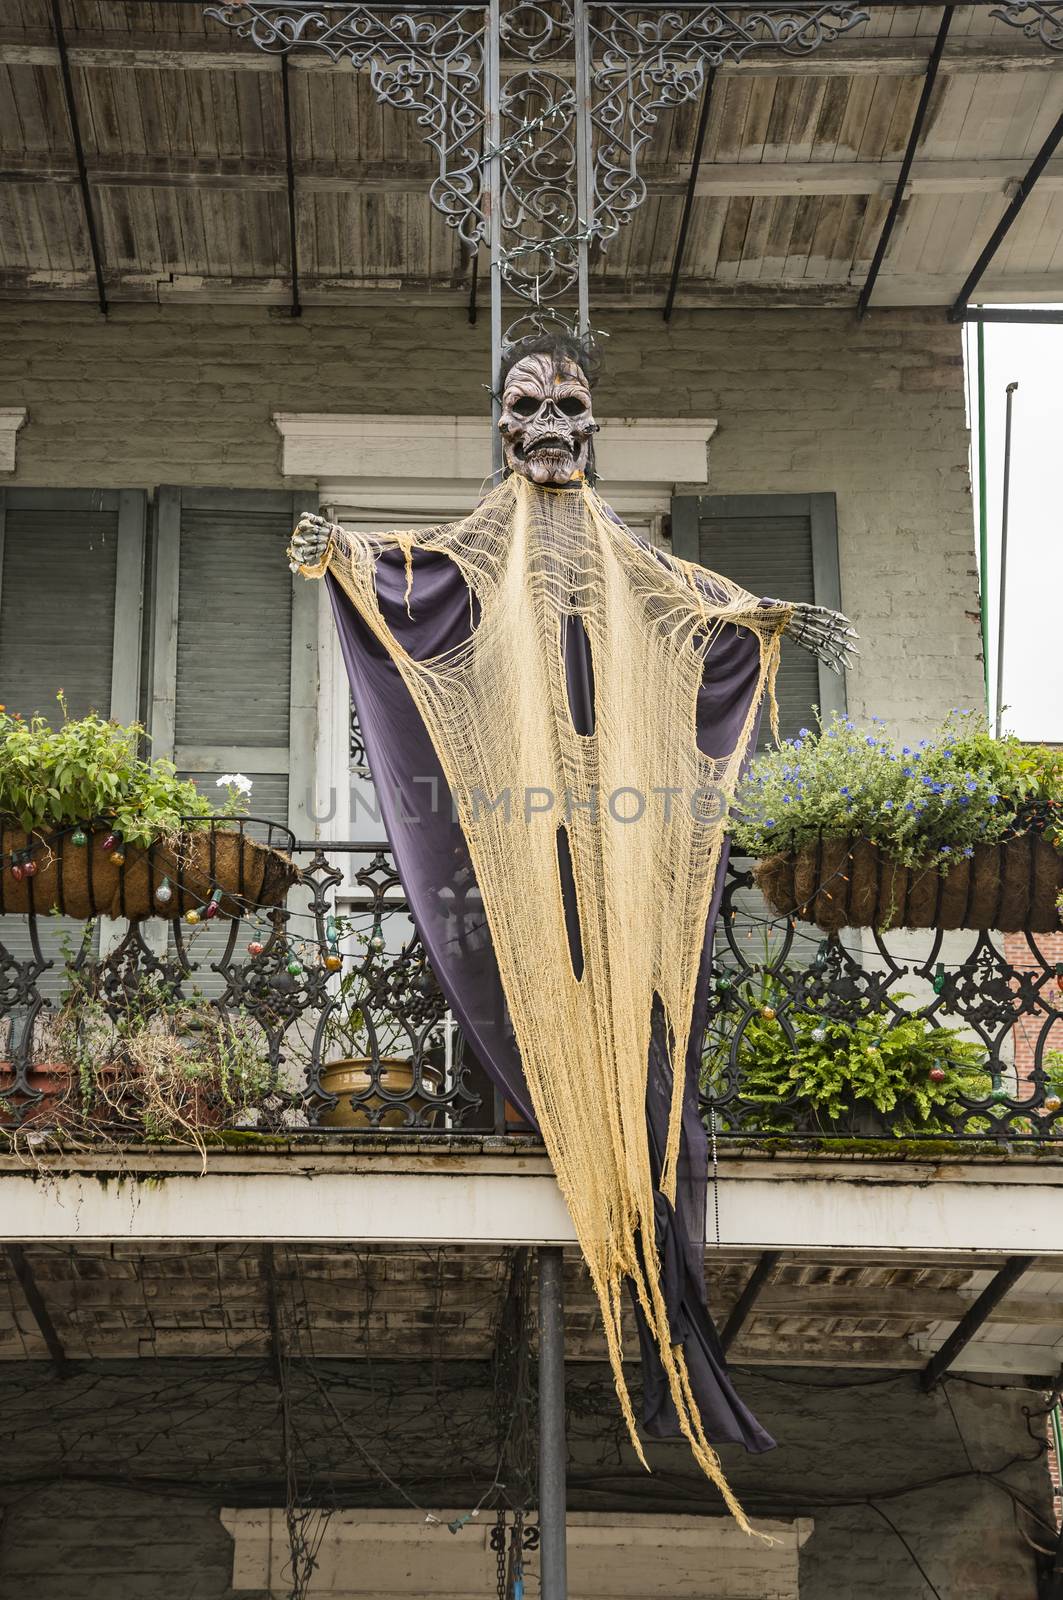 Halloween decorations on a balcony by edella